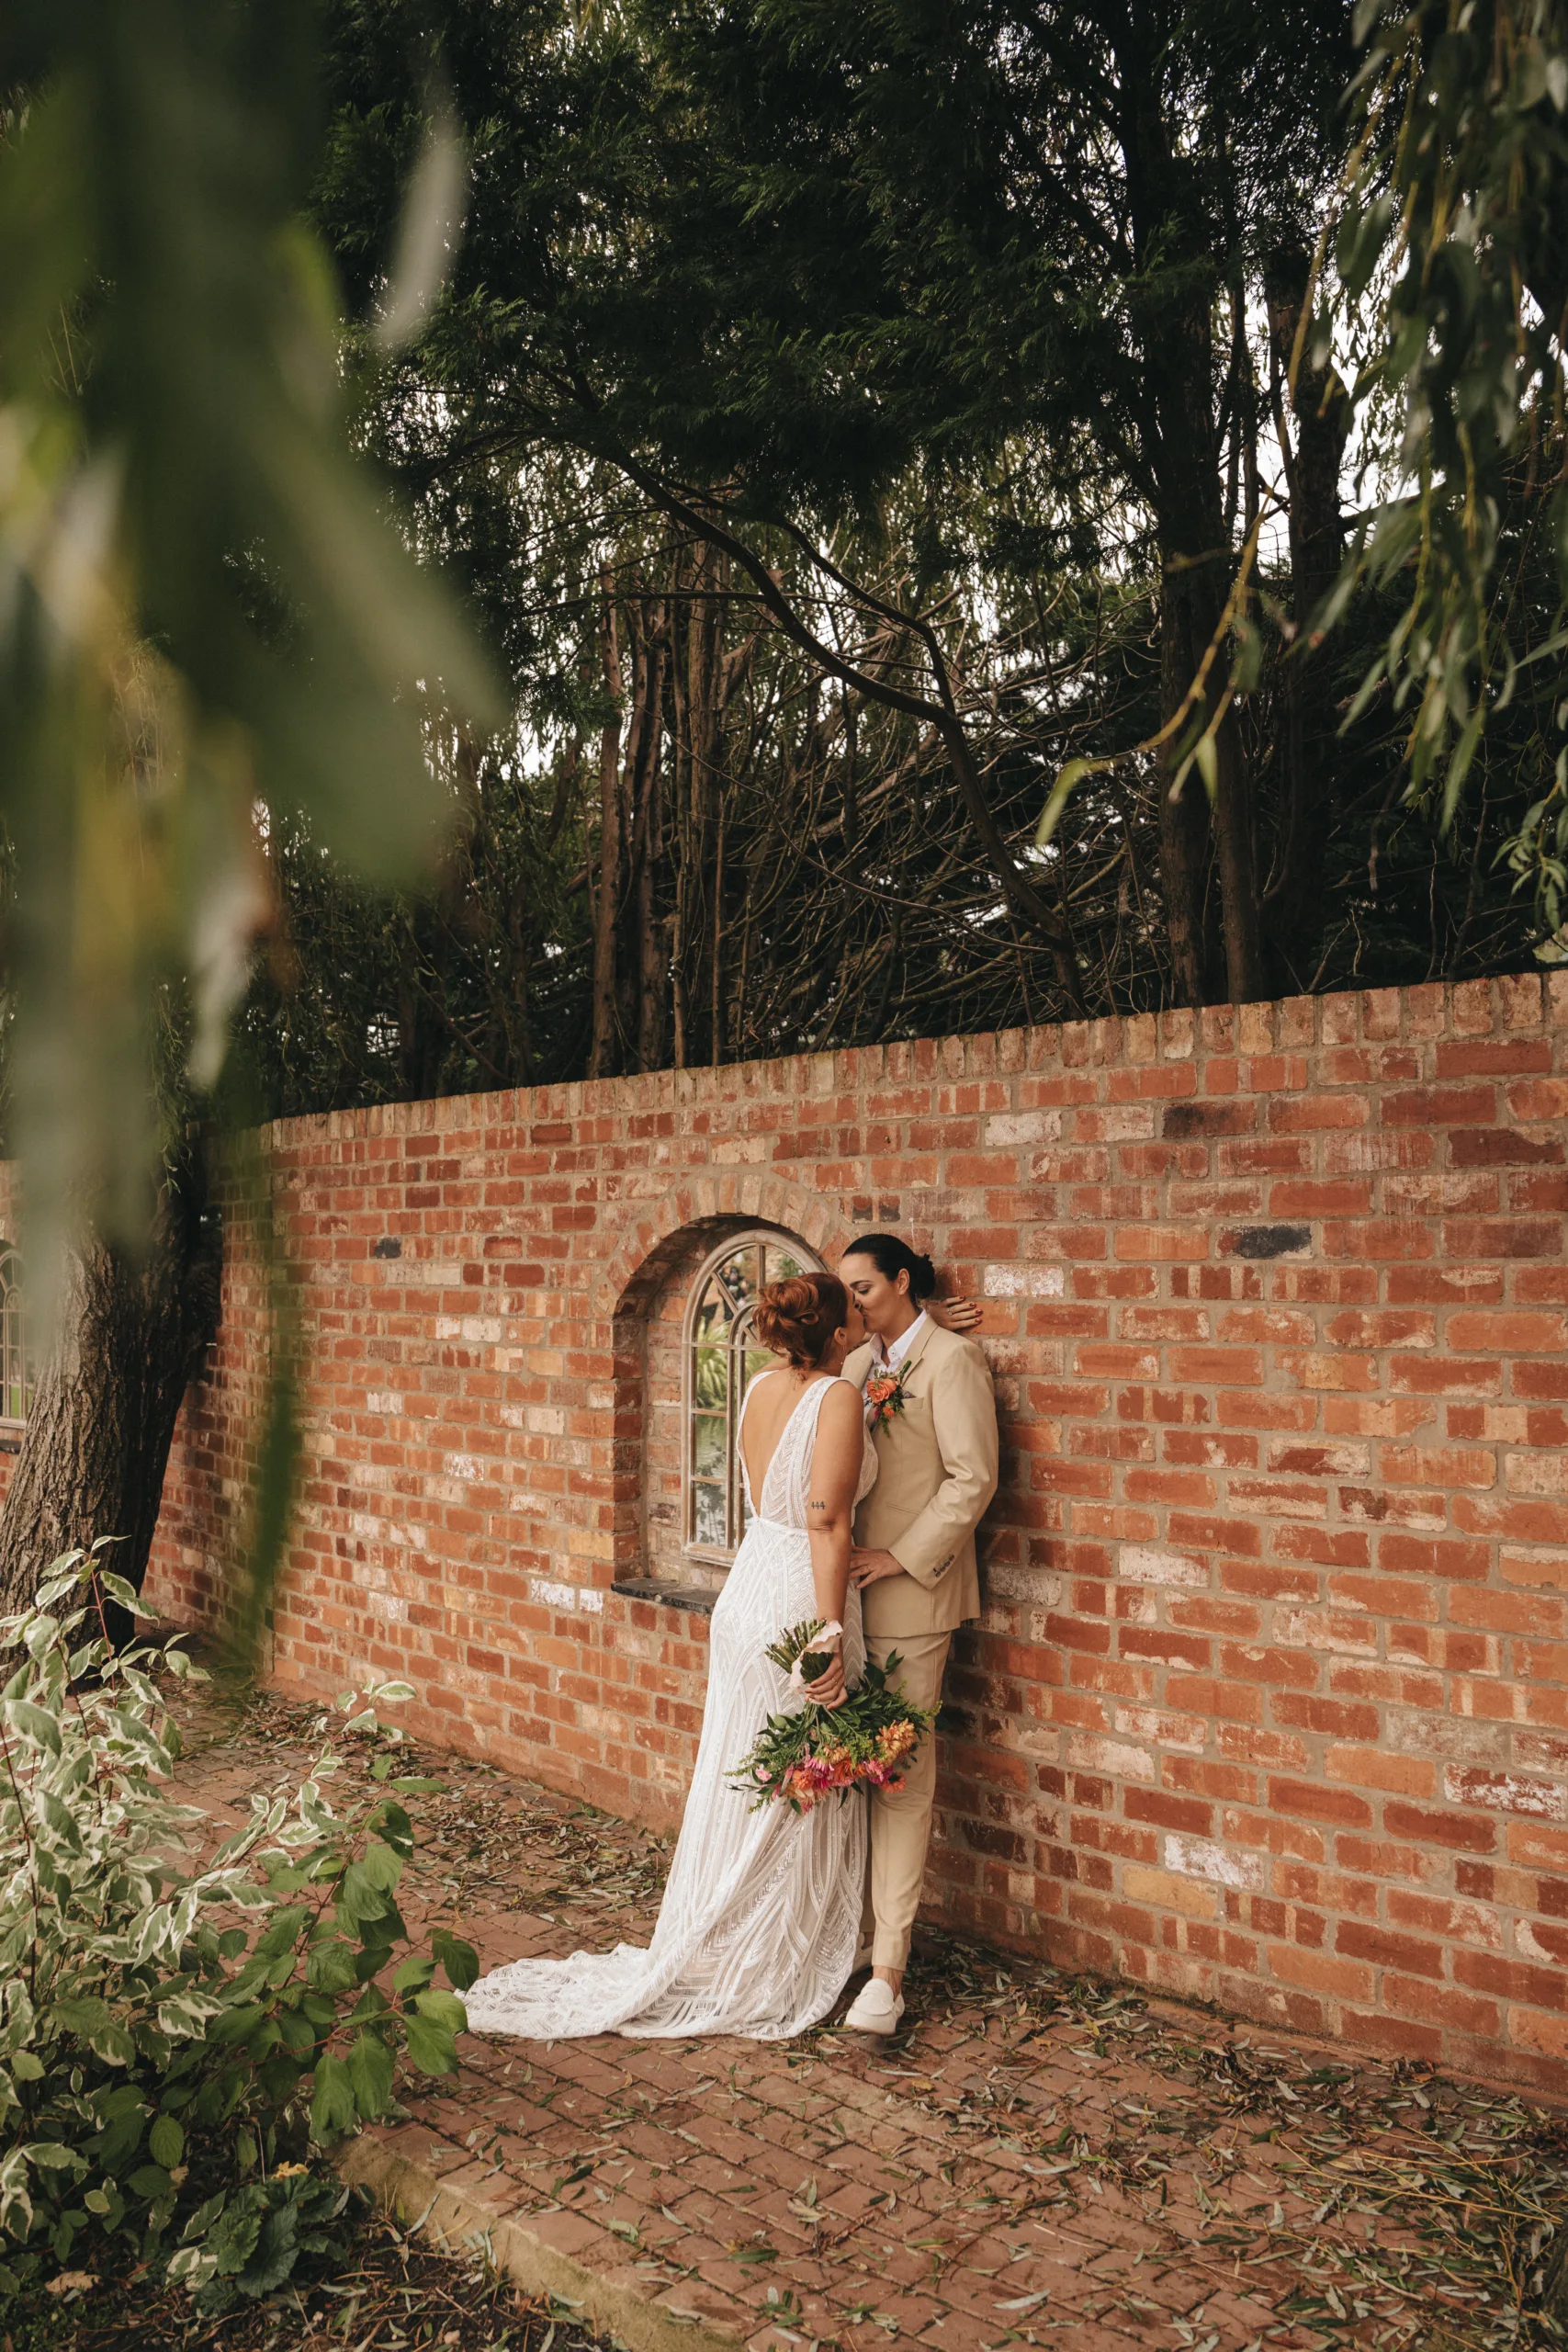 A bride and groom share a kiss in front of a brick wall captured by a wedding photographer in Lincolnshire.